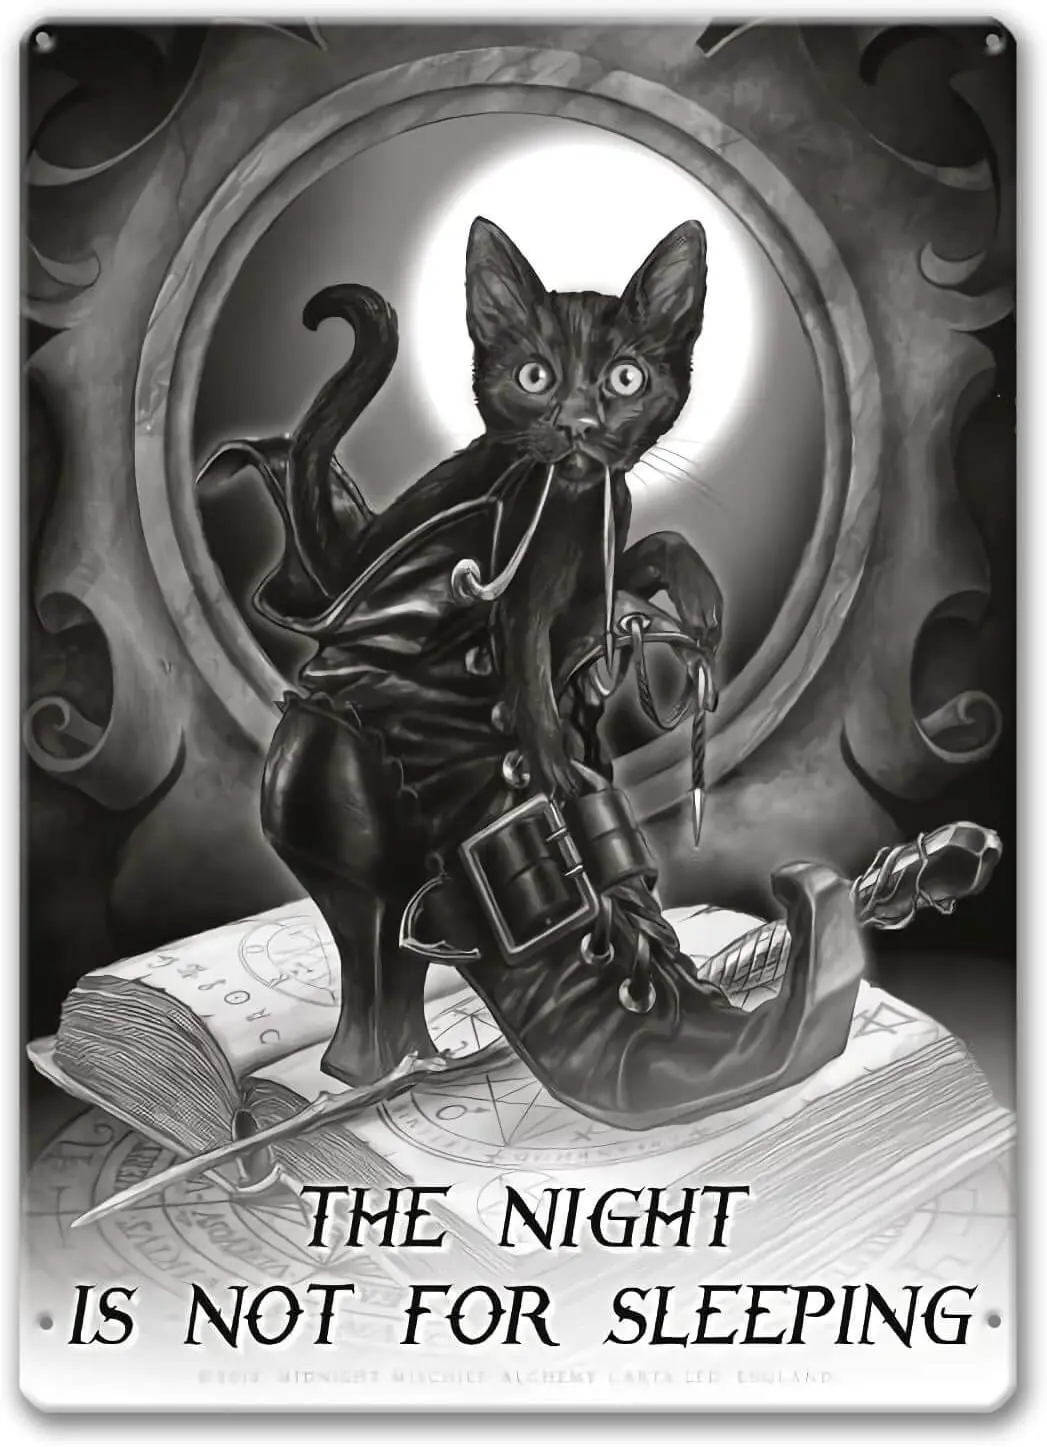 

Agedsign Alchemy Gothic Poster, Metal Sign Vintage Midnight Mischief - The Night is not for Sleeping Wall Decor Art Print Tin